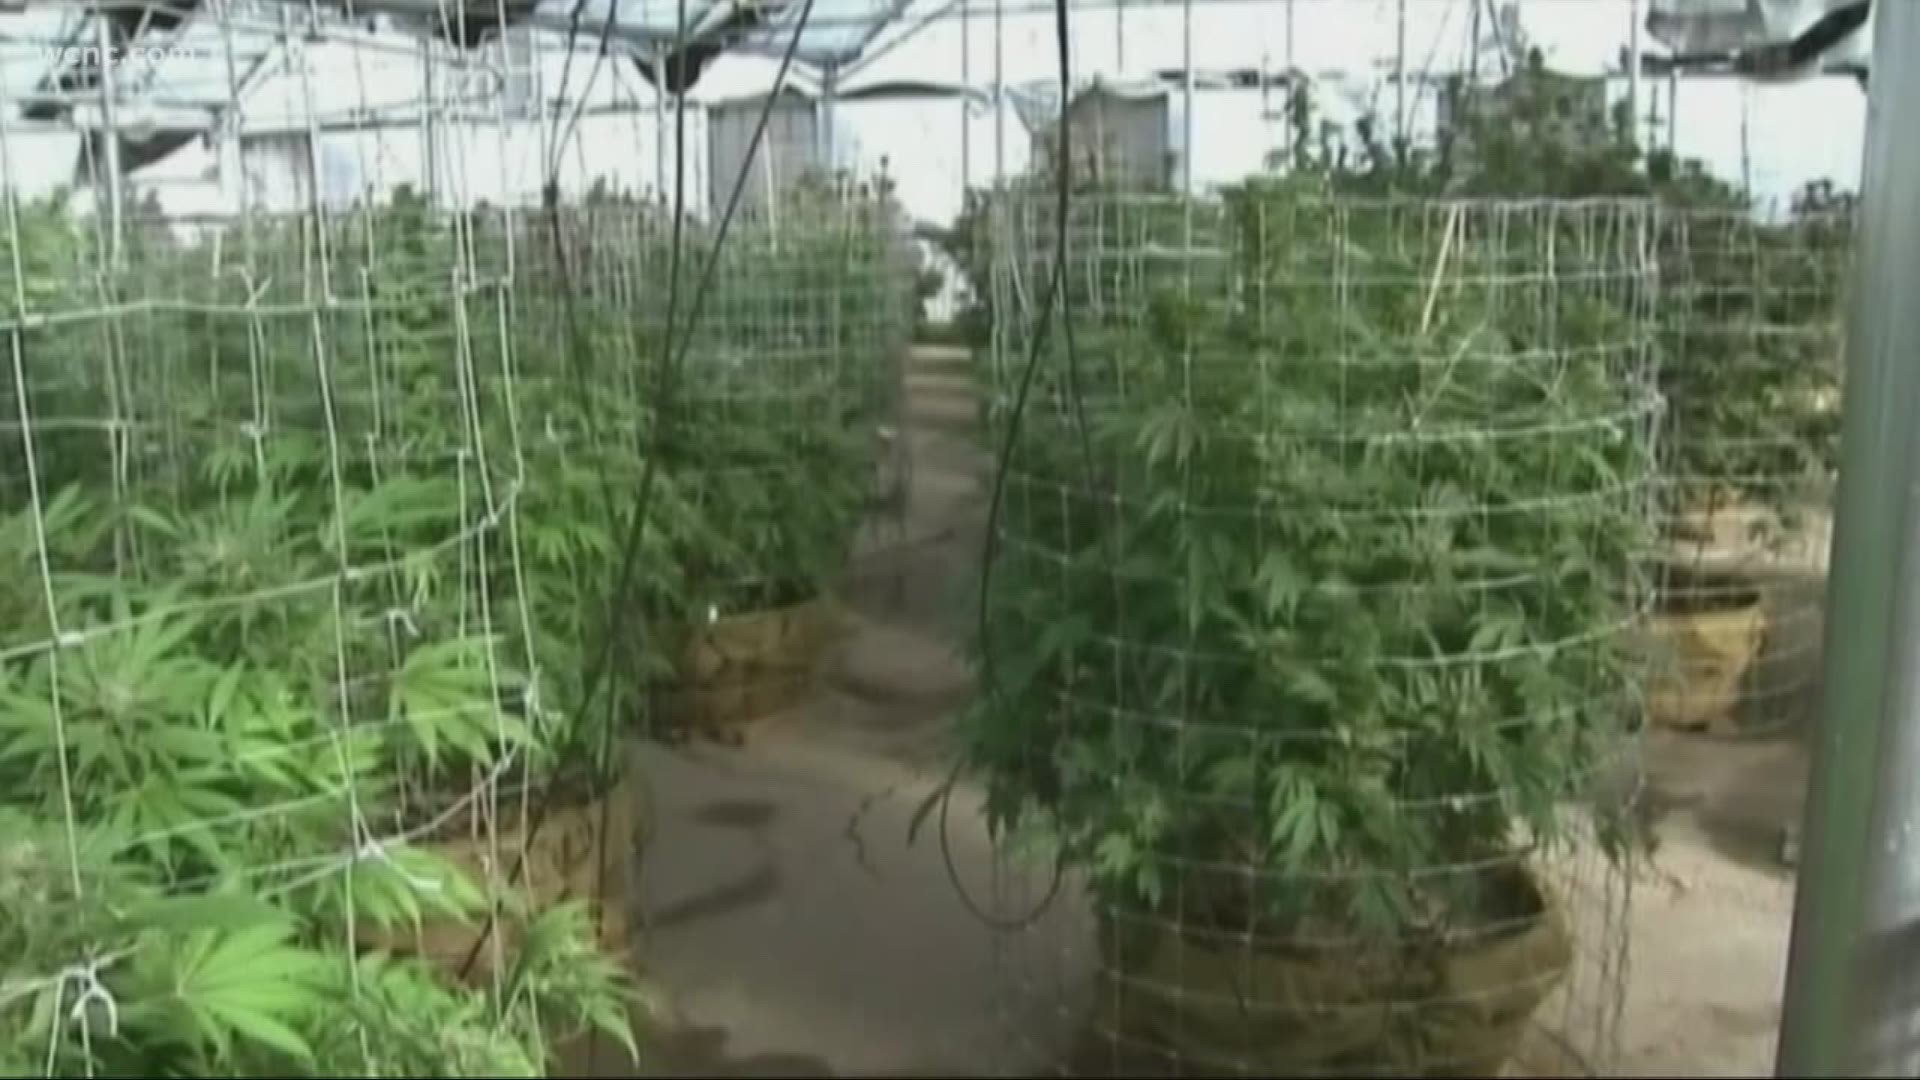 While there's no current legislation to legalize marijuana in North Carolina, the Mecklenburg County ABC Board is prepared to move forward if legislation were passed.